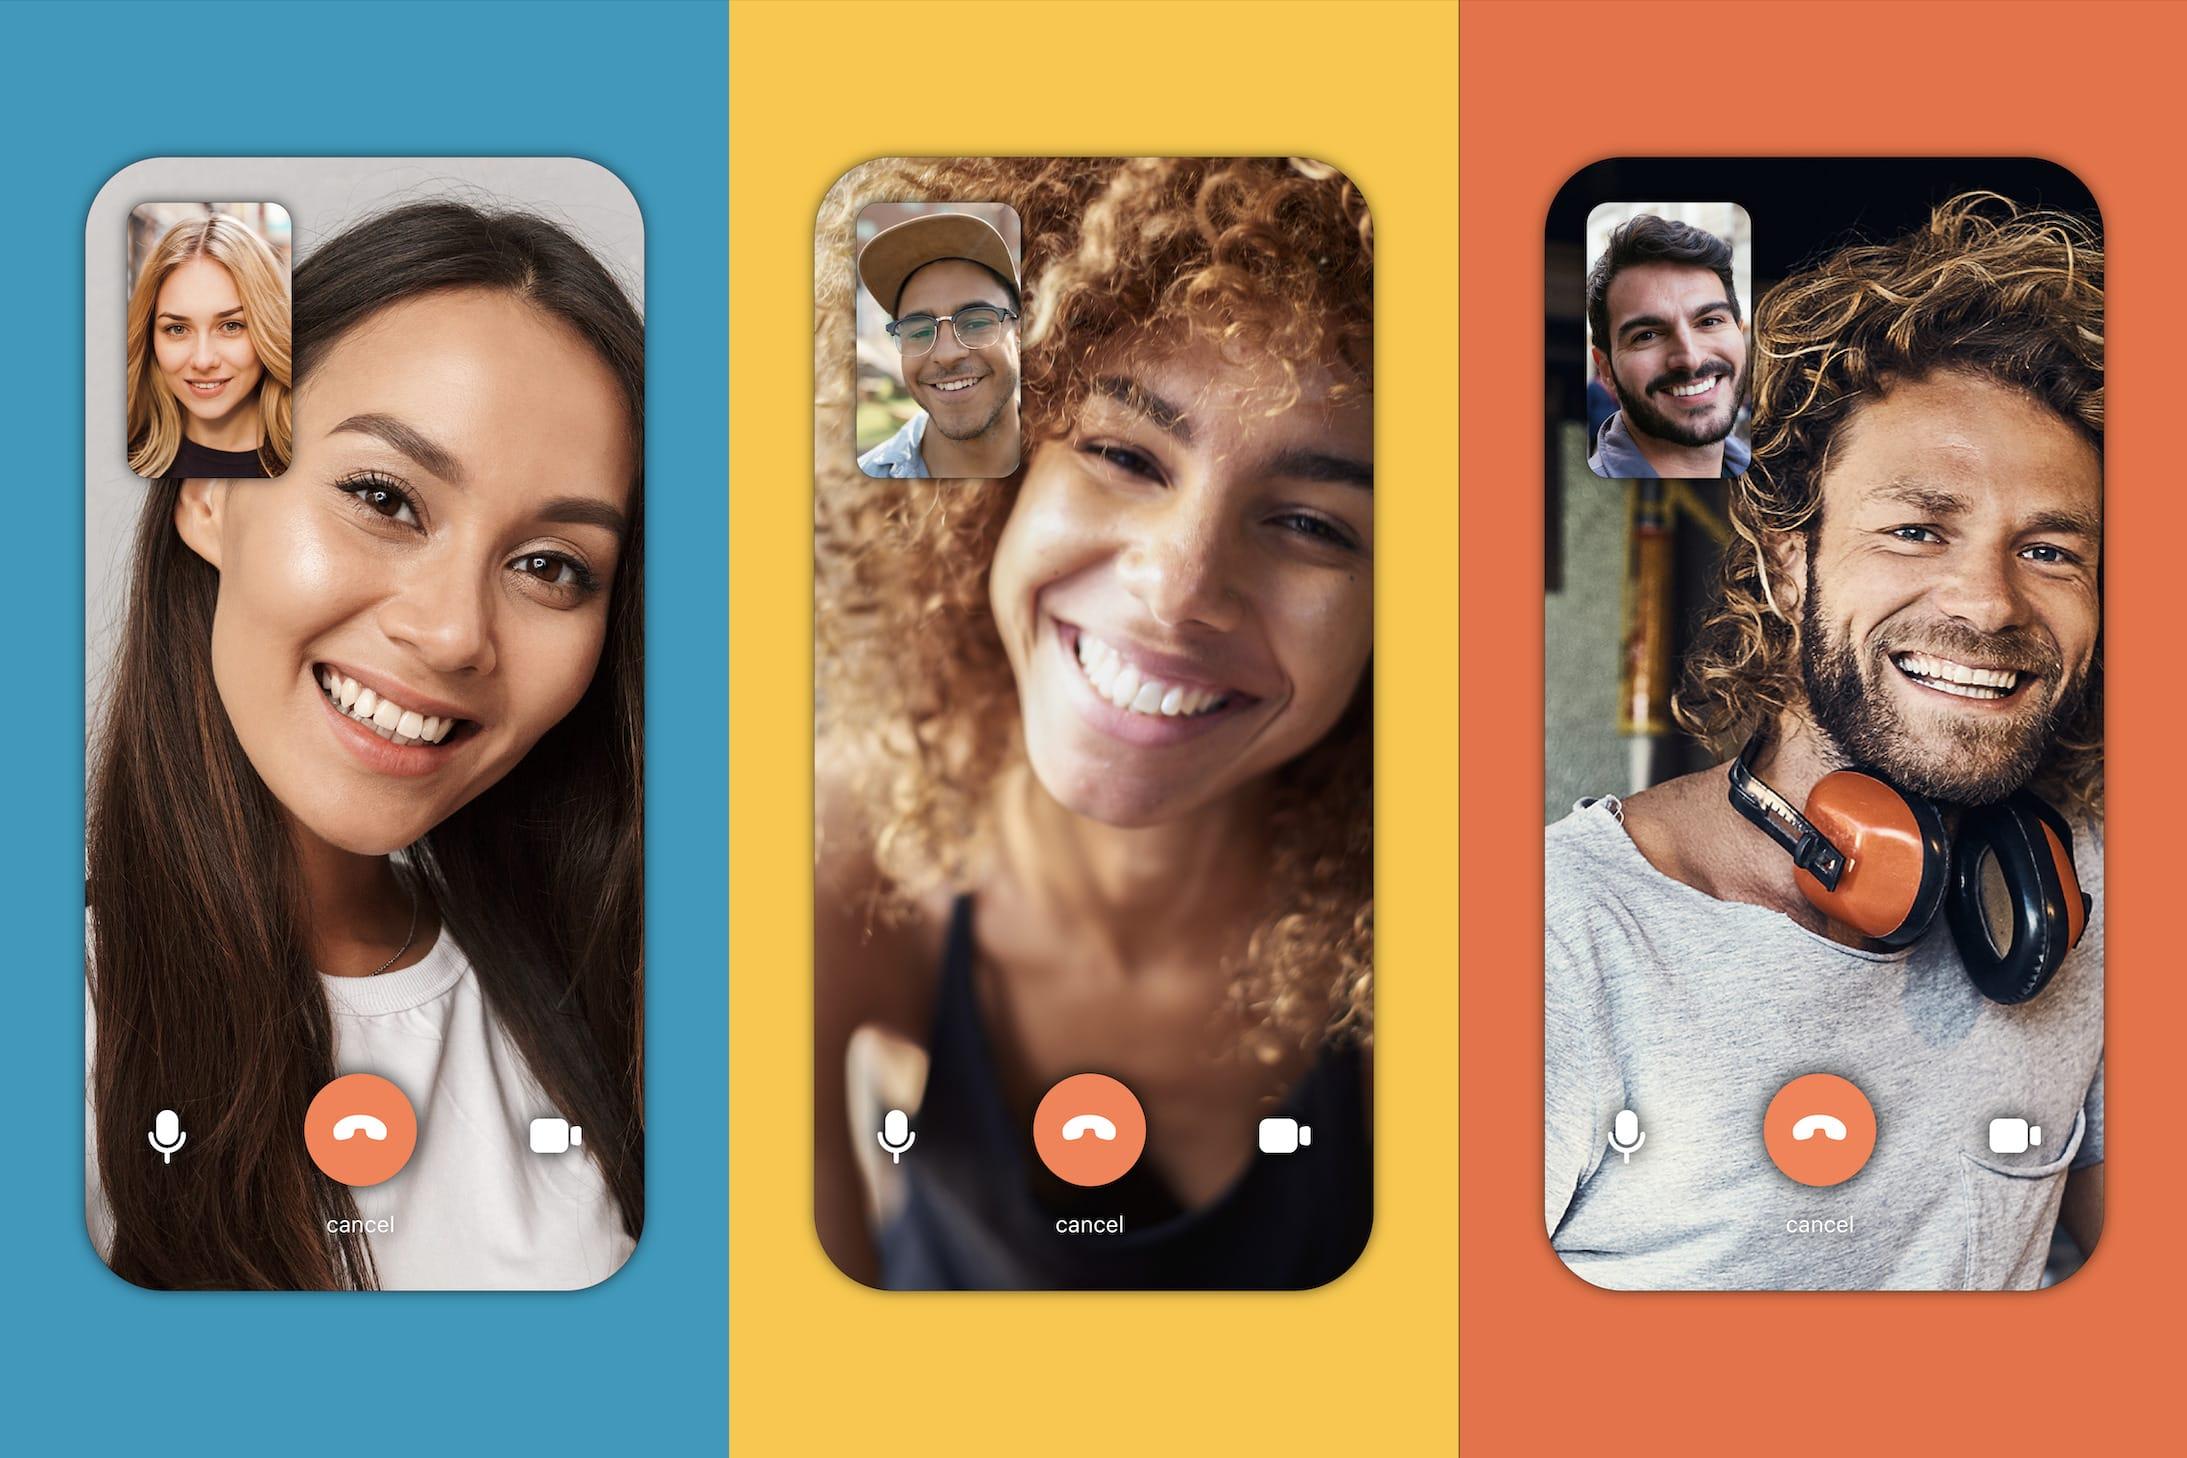 Here’s How to Use Bumble’s Video Chat and Voice Call Features